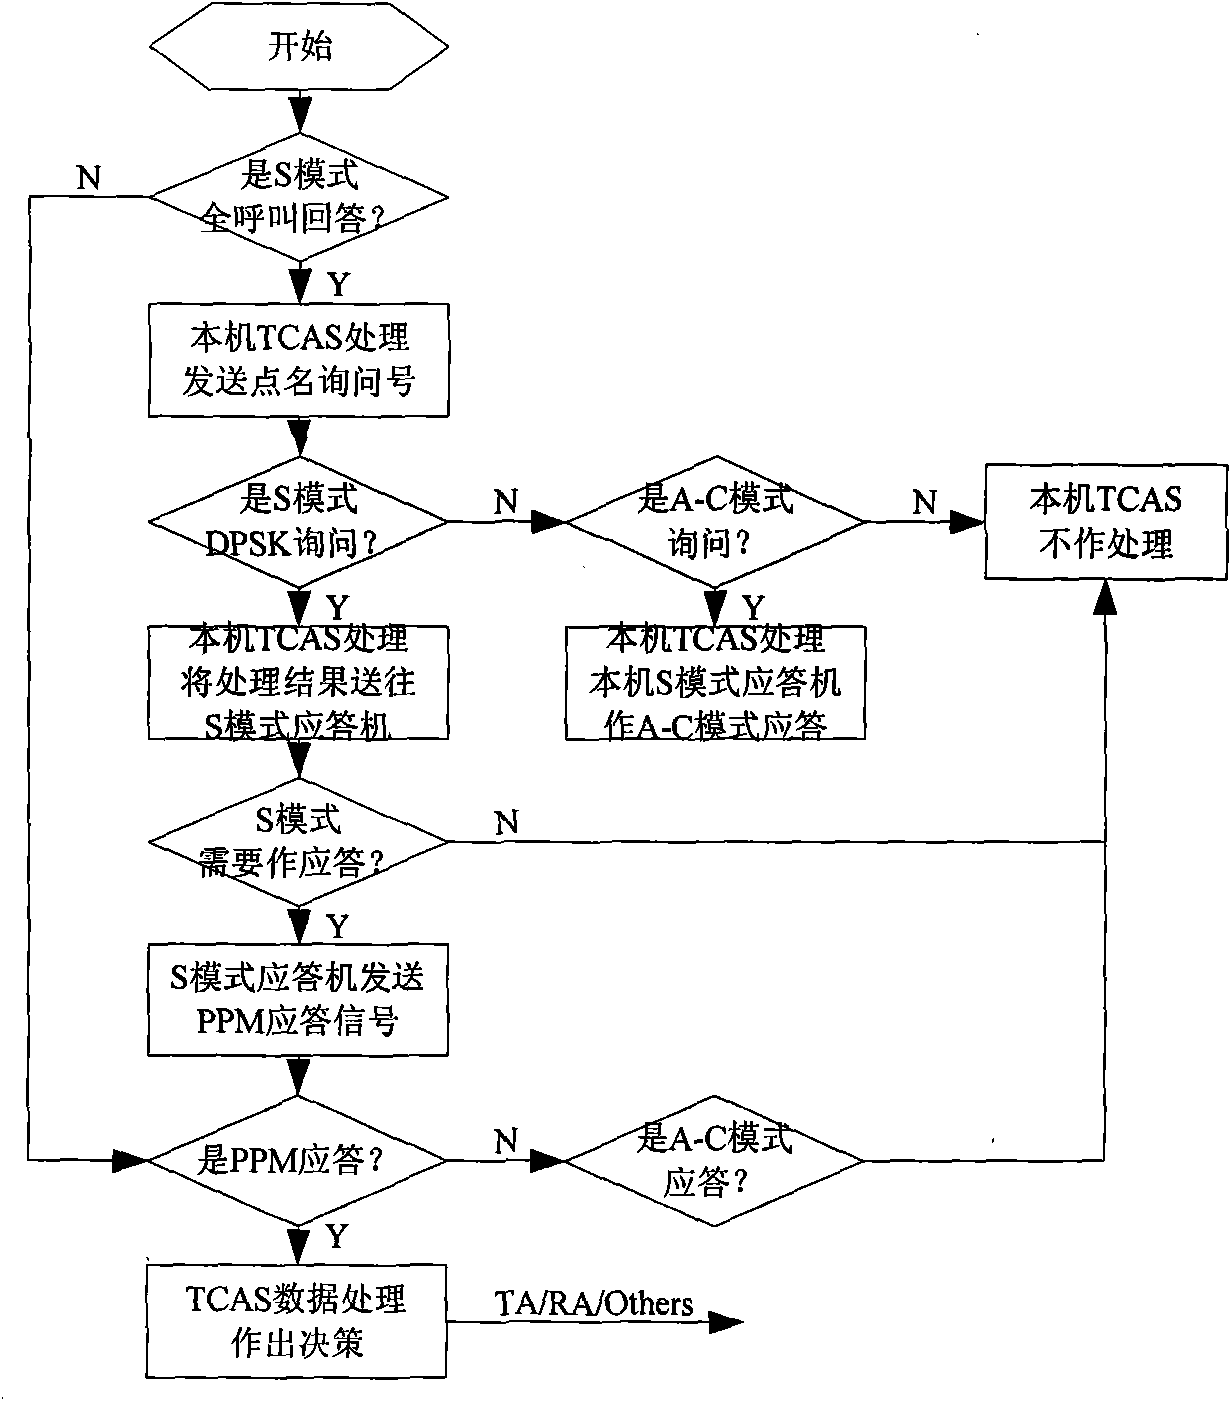 Method for automatically transceiving signals for integrated TCAS (traffic collision avoidance system)